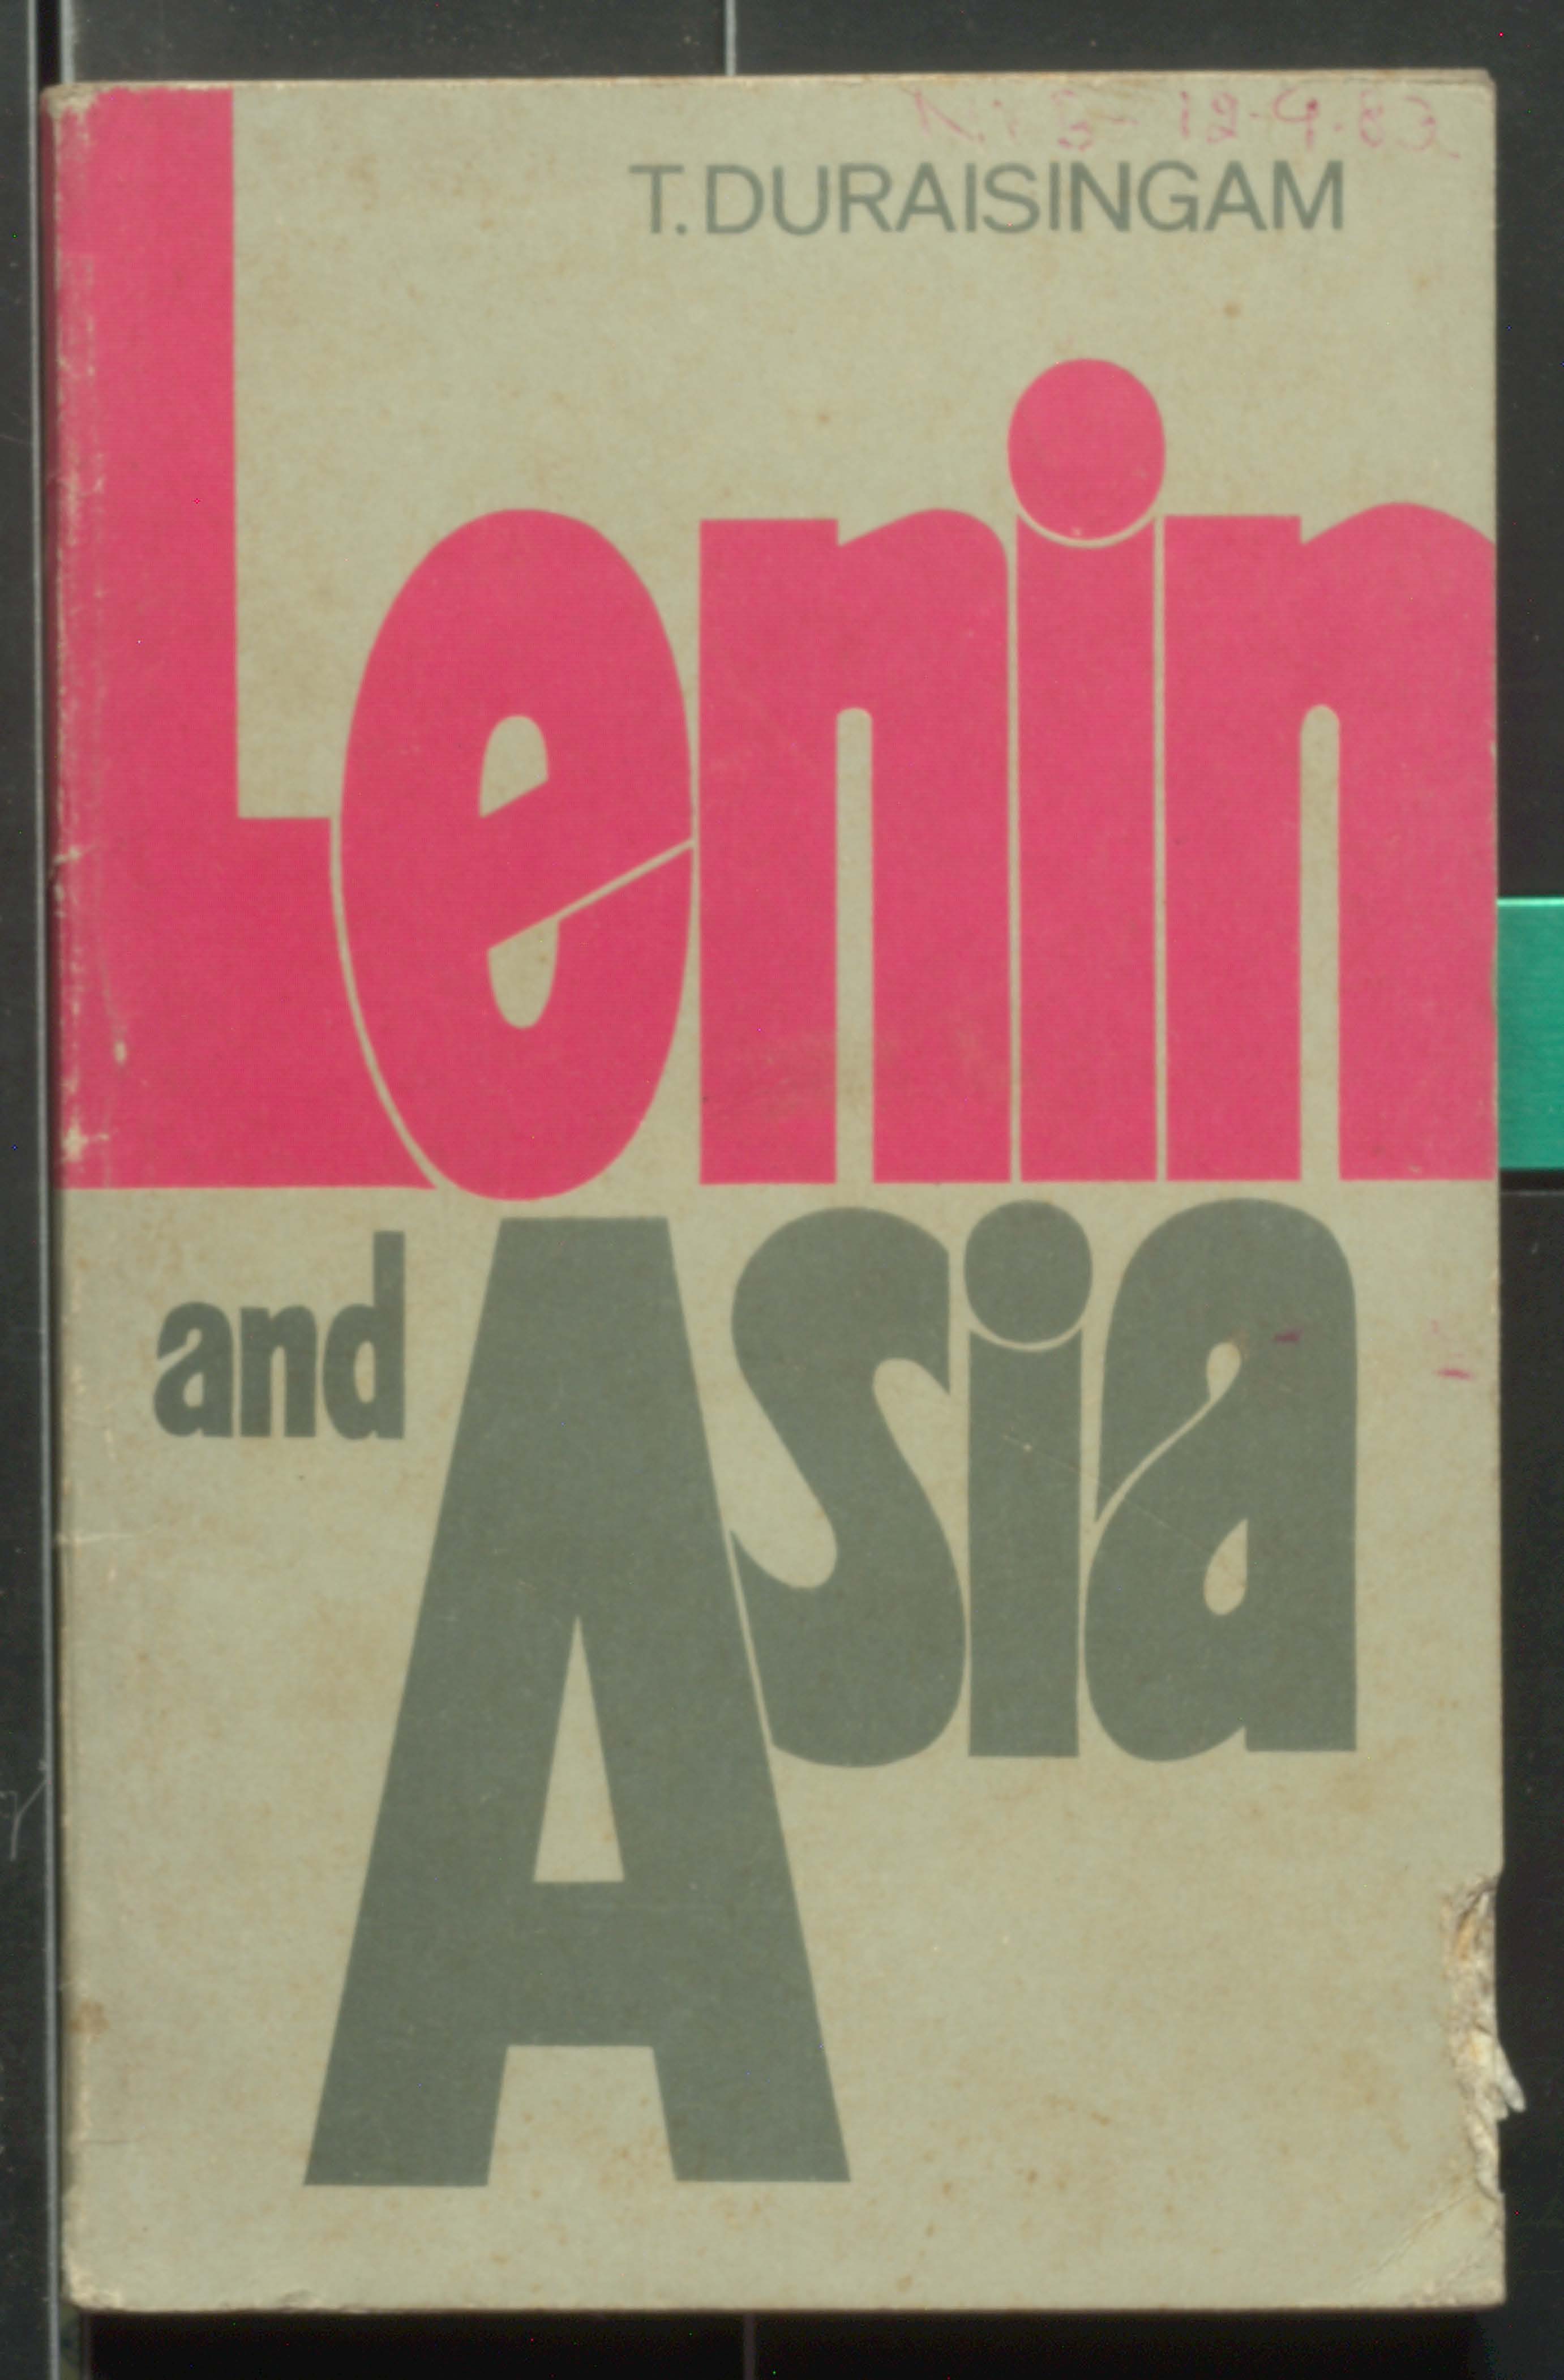 Lenin and asia